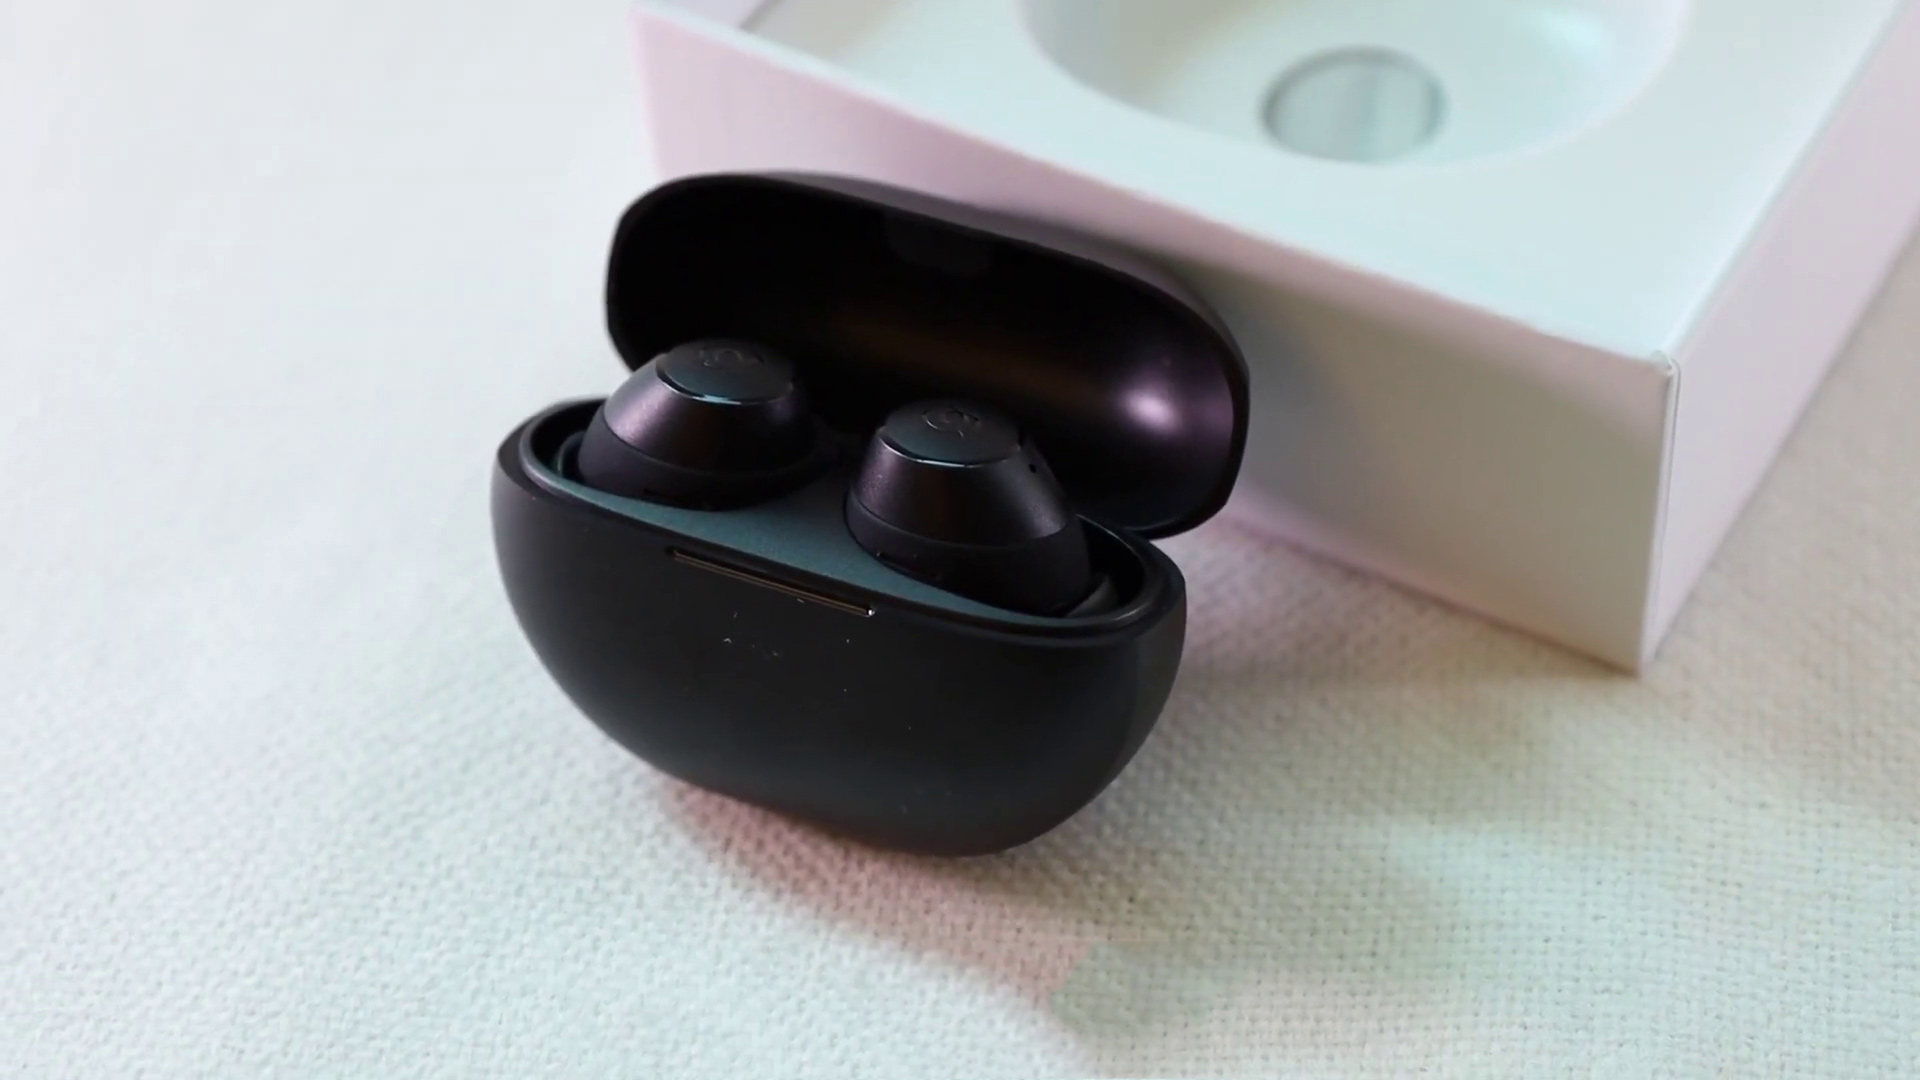 Haylou GT1 2022 Review - New Noise Cancellation Earbuds Under $20